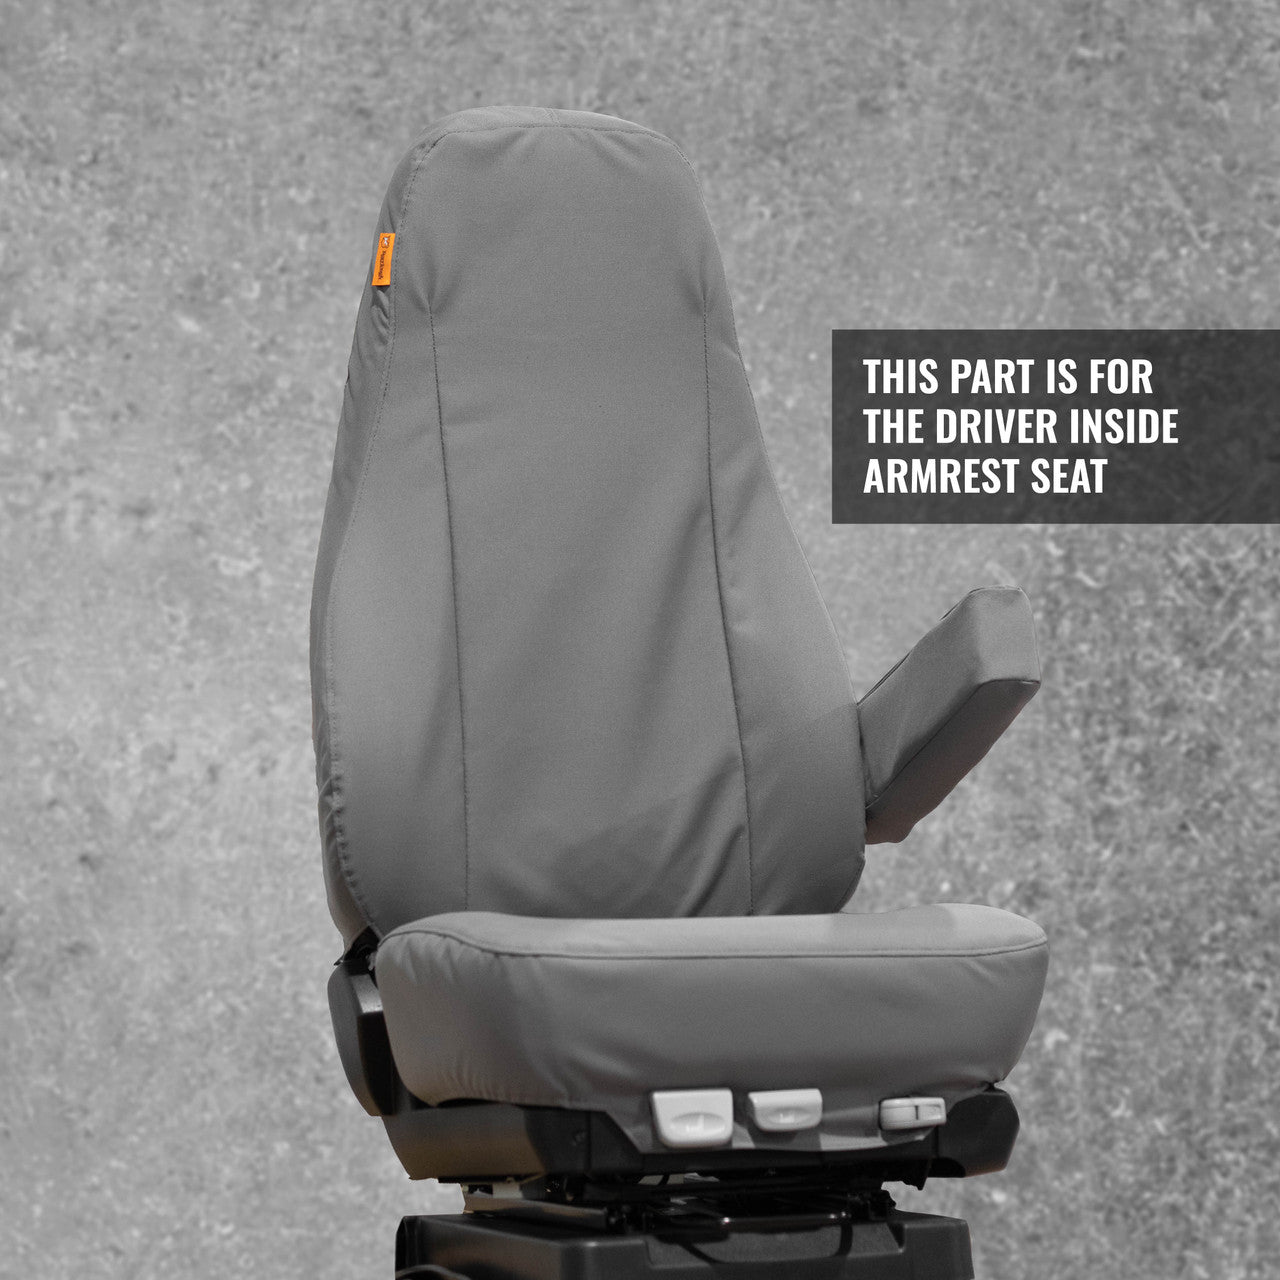 ISRI seat cover, all American made from ultra-durable Cordura fabric